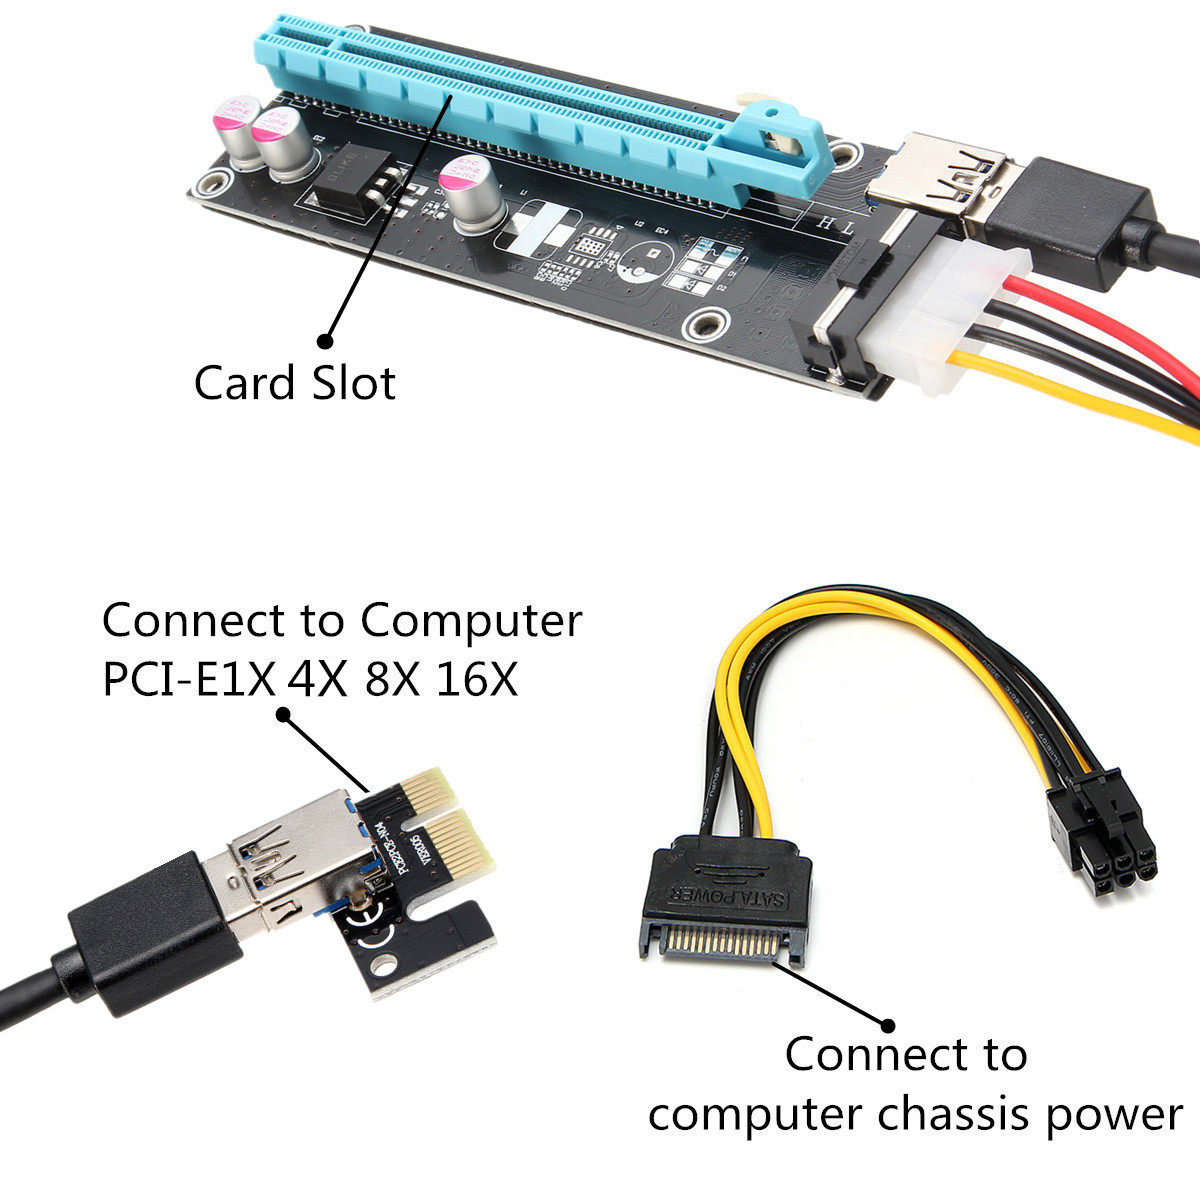 PCIE-Mining-Cable-1X-to-16X-Graphics-Card-Extension-Cable-PCI-E-Anti-burn-Design-USB30-External-Grap-1250533-6